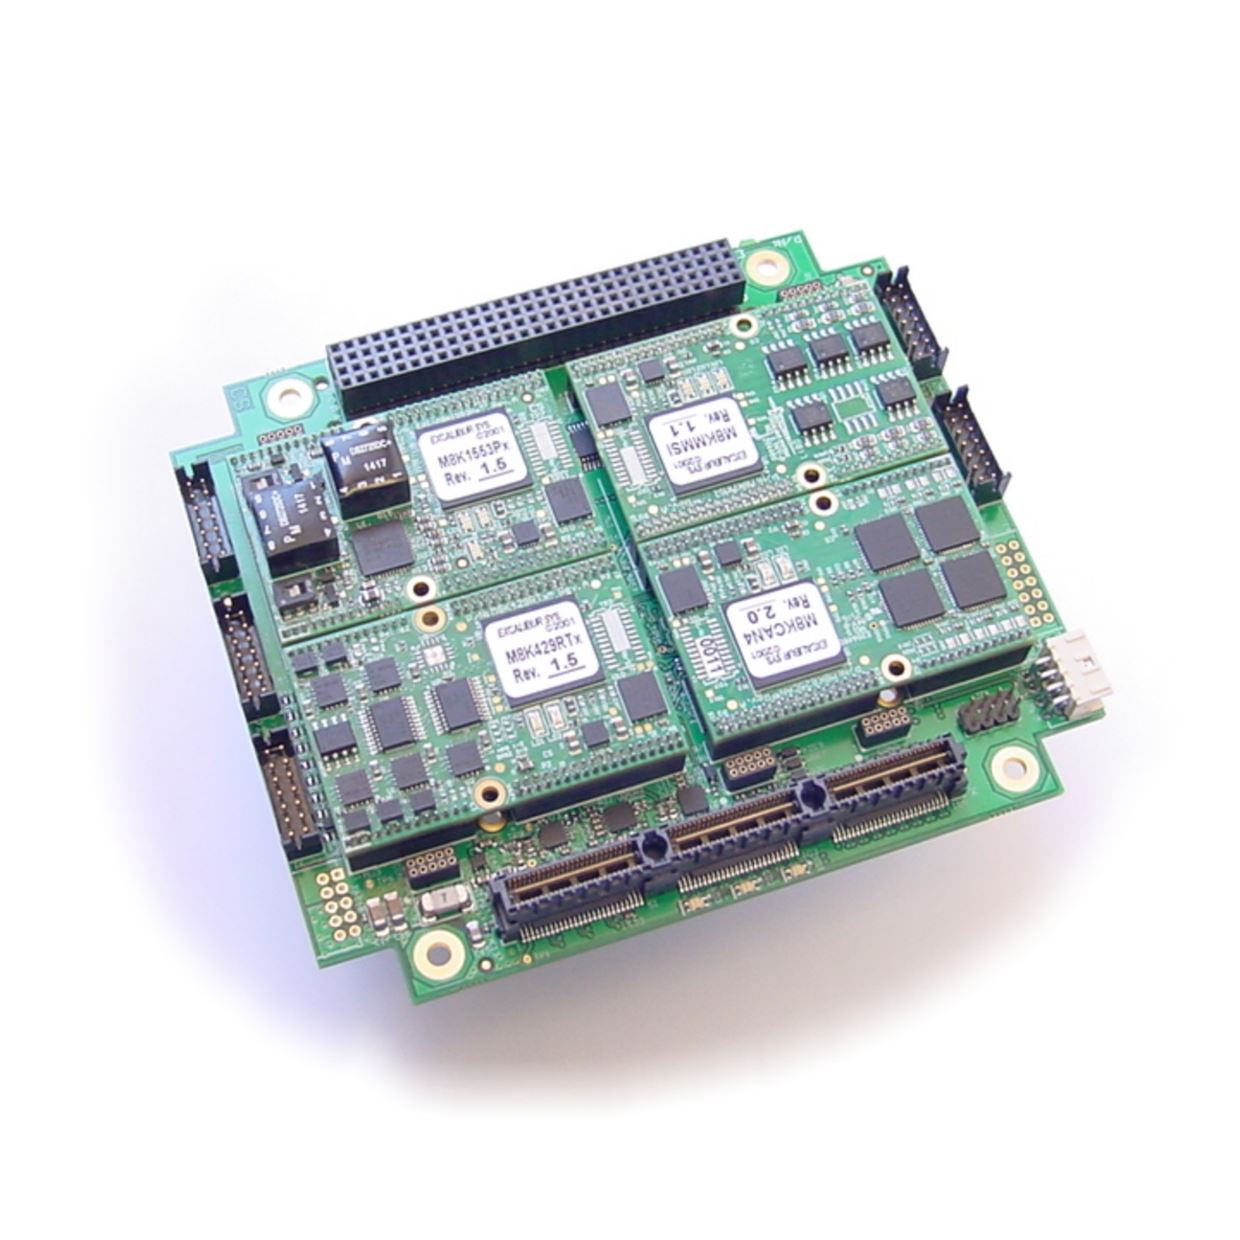 Advanced ARINC-429 test and simulation board for PCI/104-Express systems